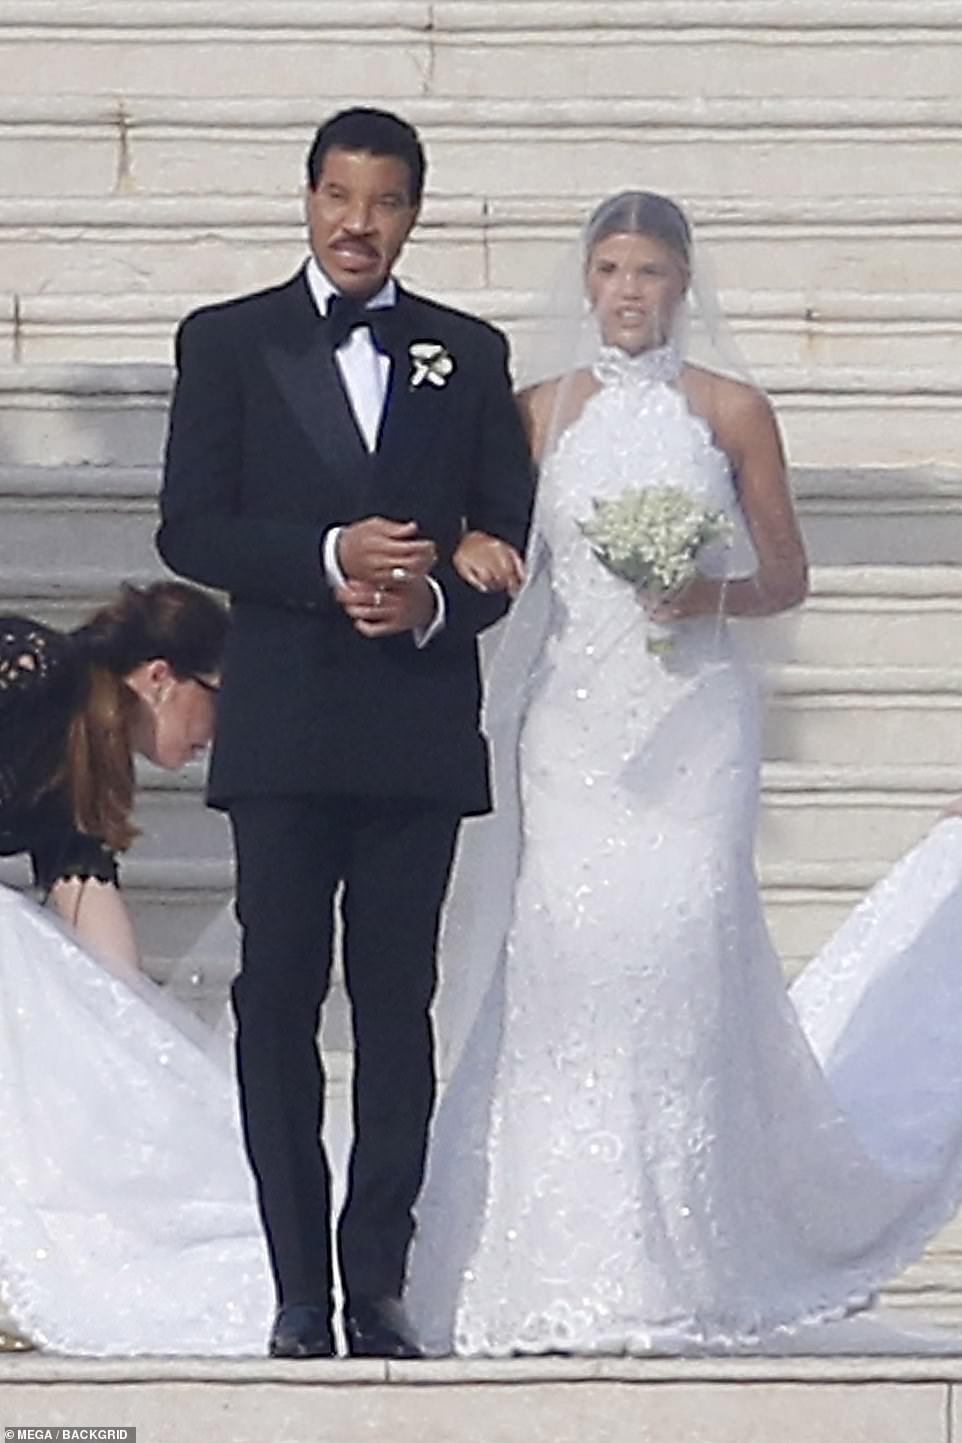 Blushing bride: Sofia Richie radiated beauty as she was escorted down the aisle by her father, music legend Lionel Richie, walked her down the aisle at the luxury Hotel du Cap-Eden-Roc in the French Riviera on Saturday